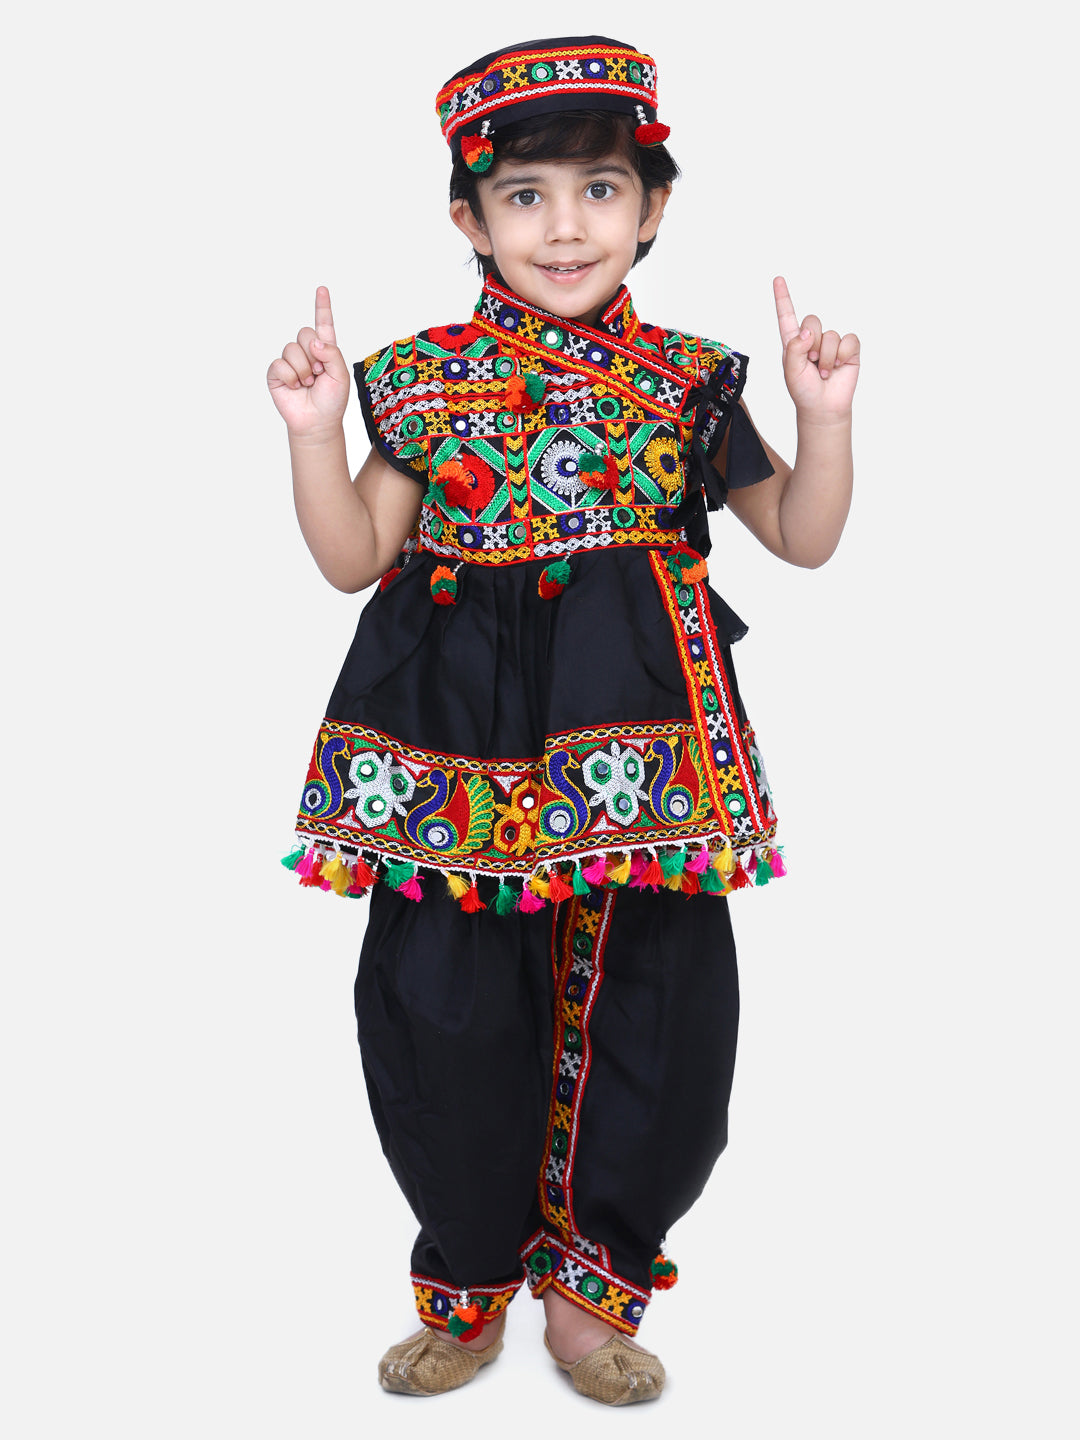 Diwali Dress-Up: Ethnic Outfits to Make Your Kids Shine | by Earthytweens |  Medium